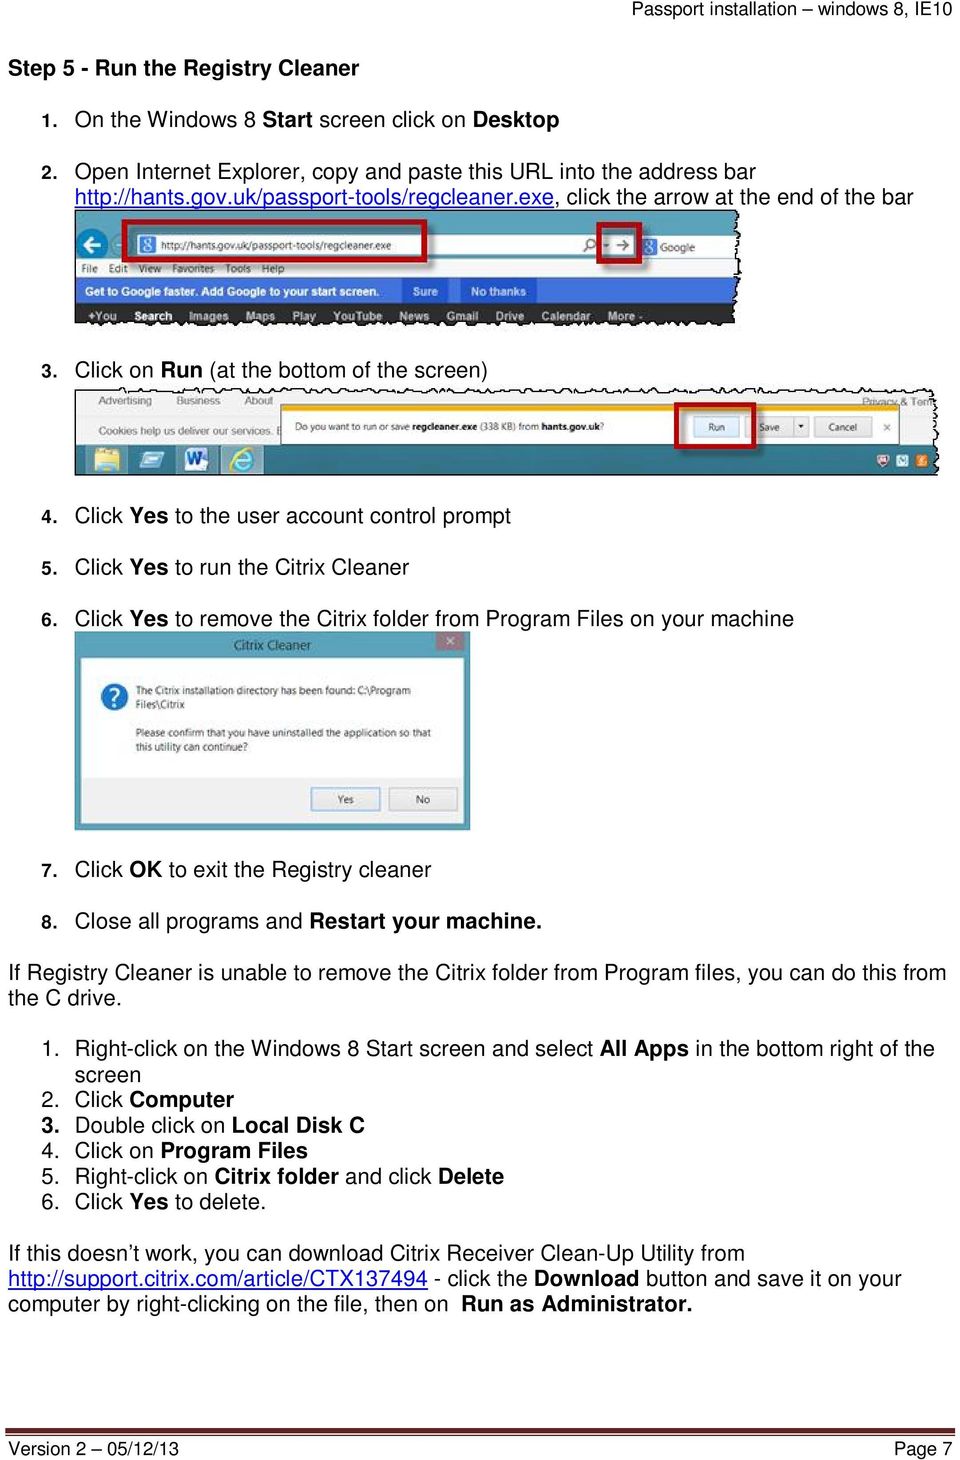 Click Yes to run the Citrix Cleaner 6. Click Yes to remove the Citrix folder from Program Files on your machine 7. Click OK to exit the Registry cleaner 8. Close all programs and Restart your machine.